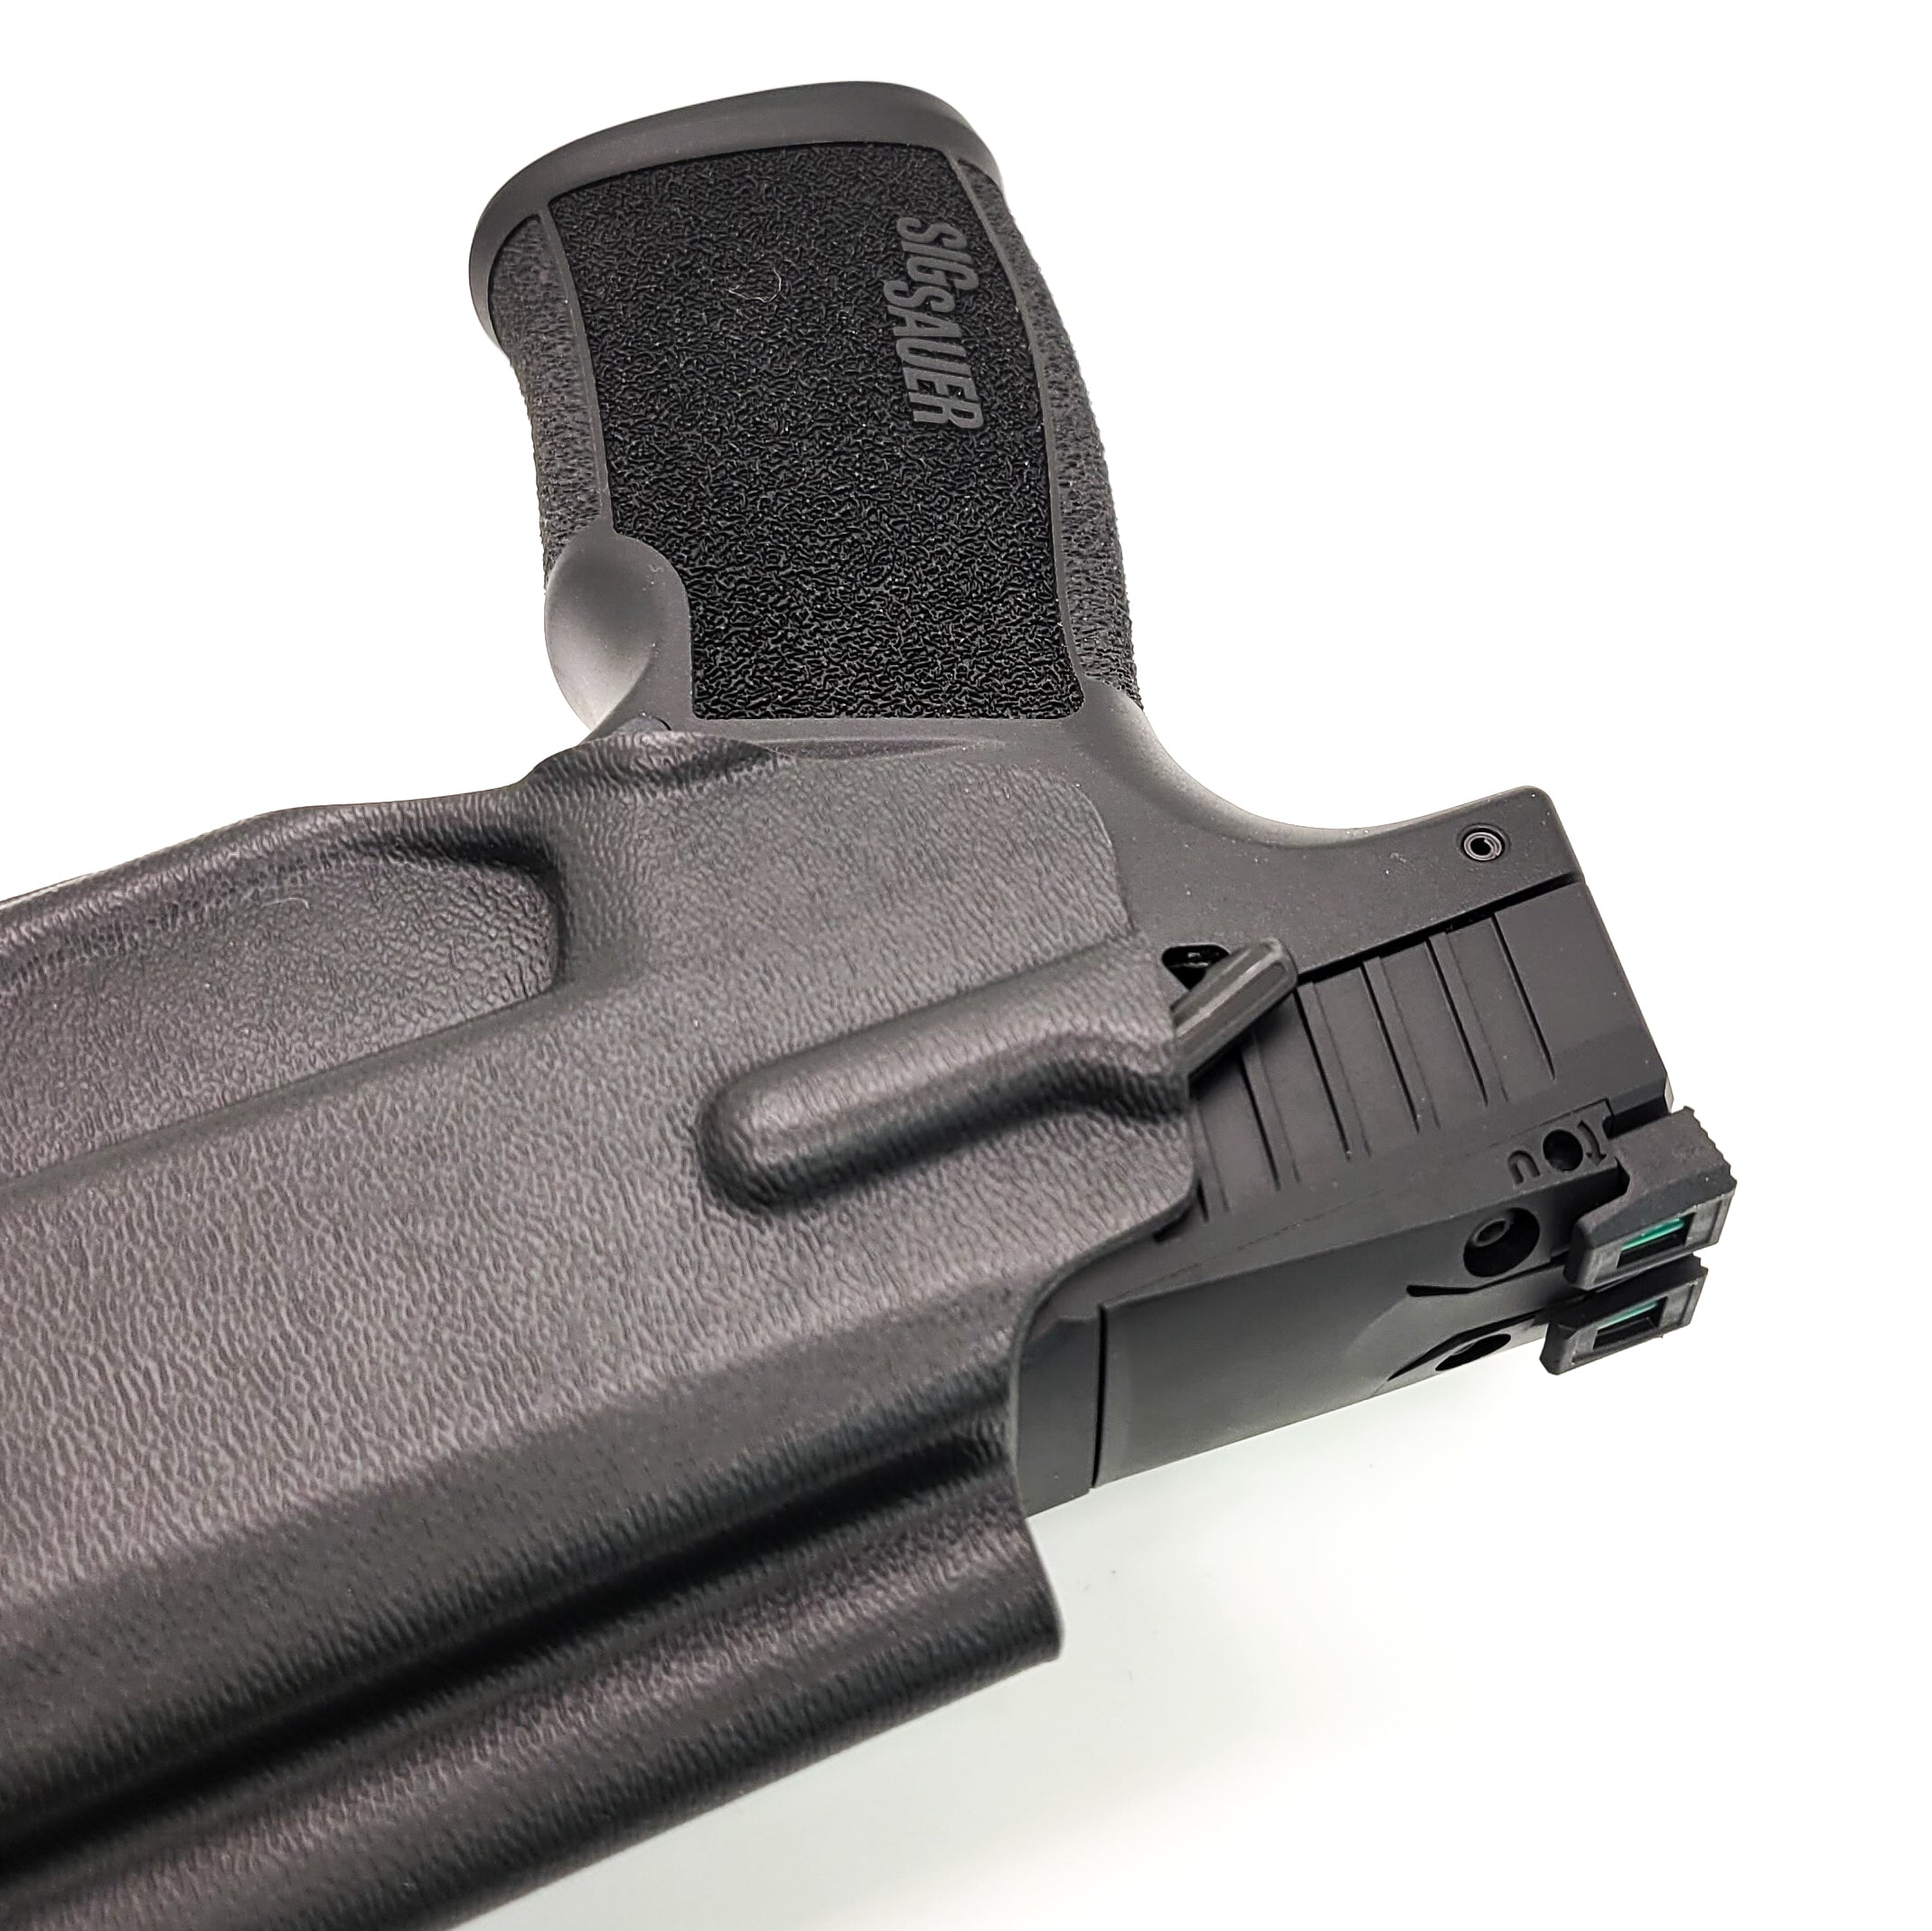 For the best Outside Waistband OWB Kydex Holster designed to fit the Sig Sauer P322 22 Long Rifle Pistol, look to Four Brothers. Perfect for competition shooting. Full sweat guard, open muzzle, adjustable retention, minimal material, & smooth edges to reduce printing. Proudly made in the USA.  P 322 22 LR 